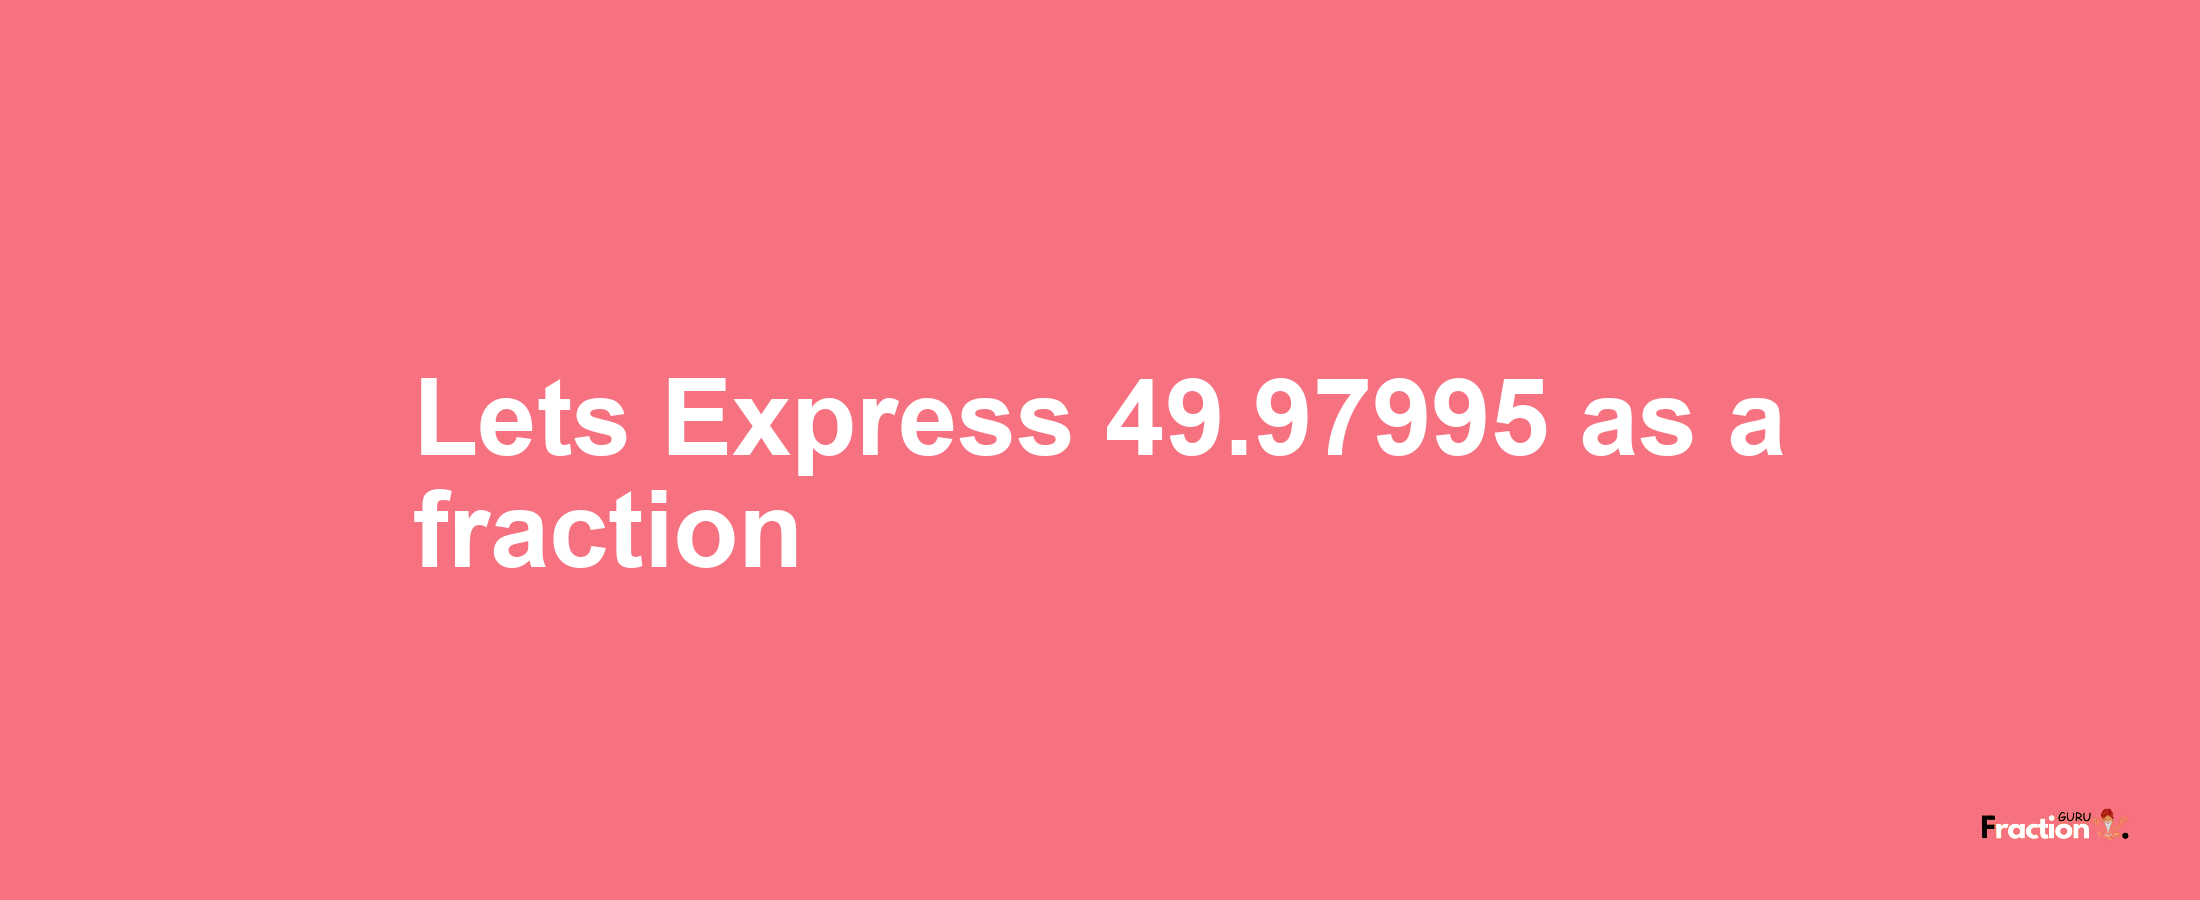 Lets Express 49.97995 as afraction